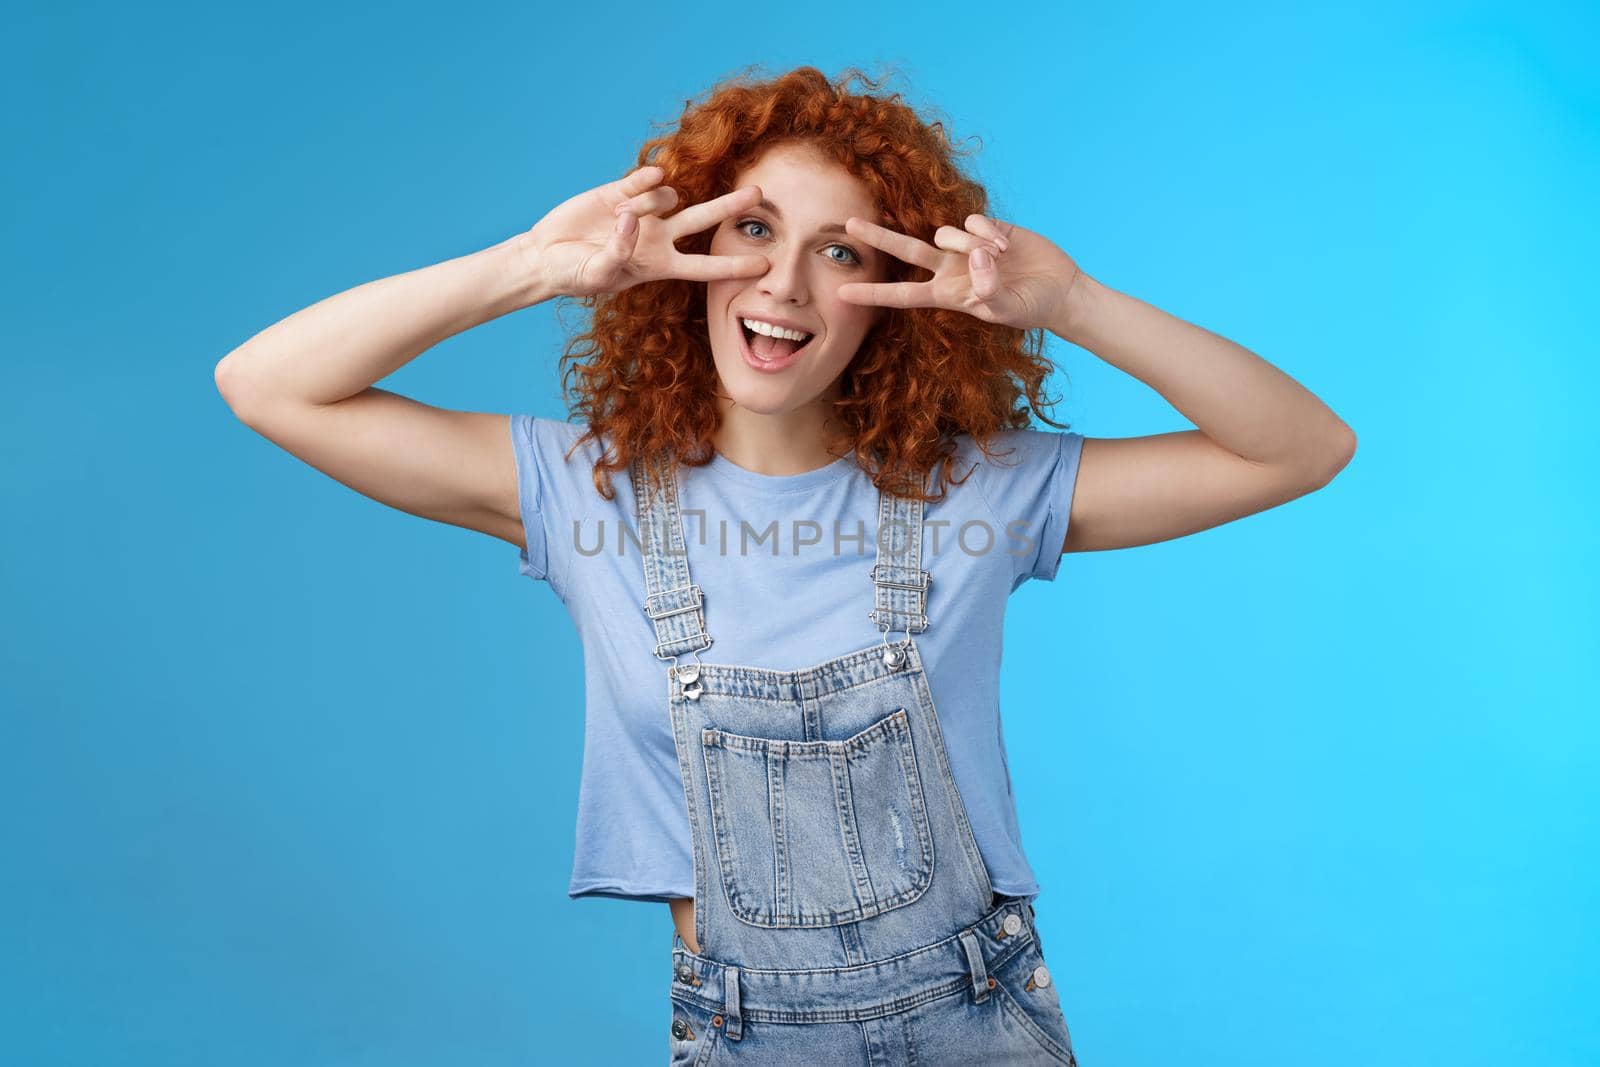 Cheerful cute redhead ginger girl curly haircut show positivity peace victory signs eyes smiling broadly have fun playful silly childish mood wear denim summer overalls blue background.